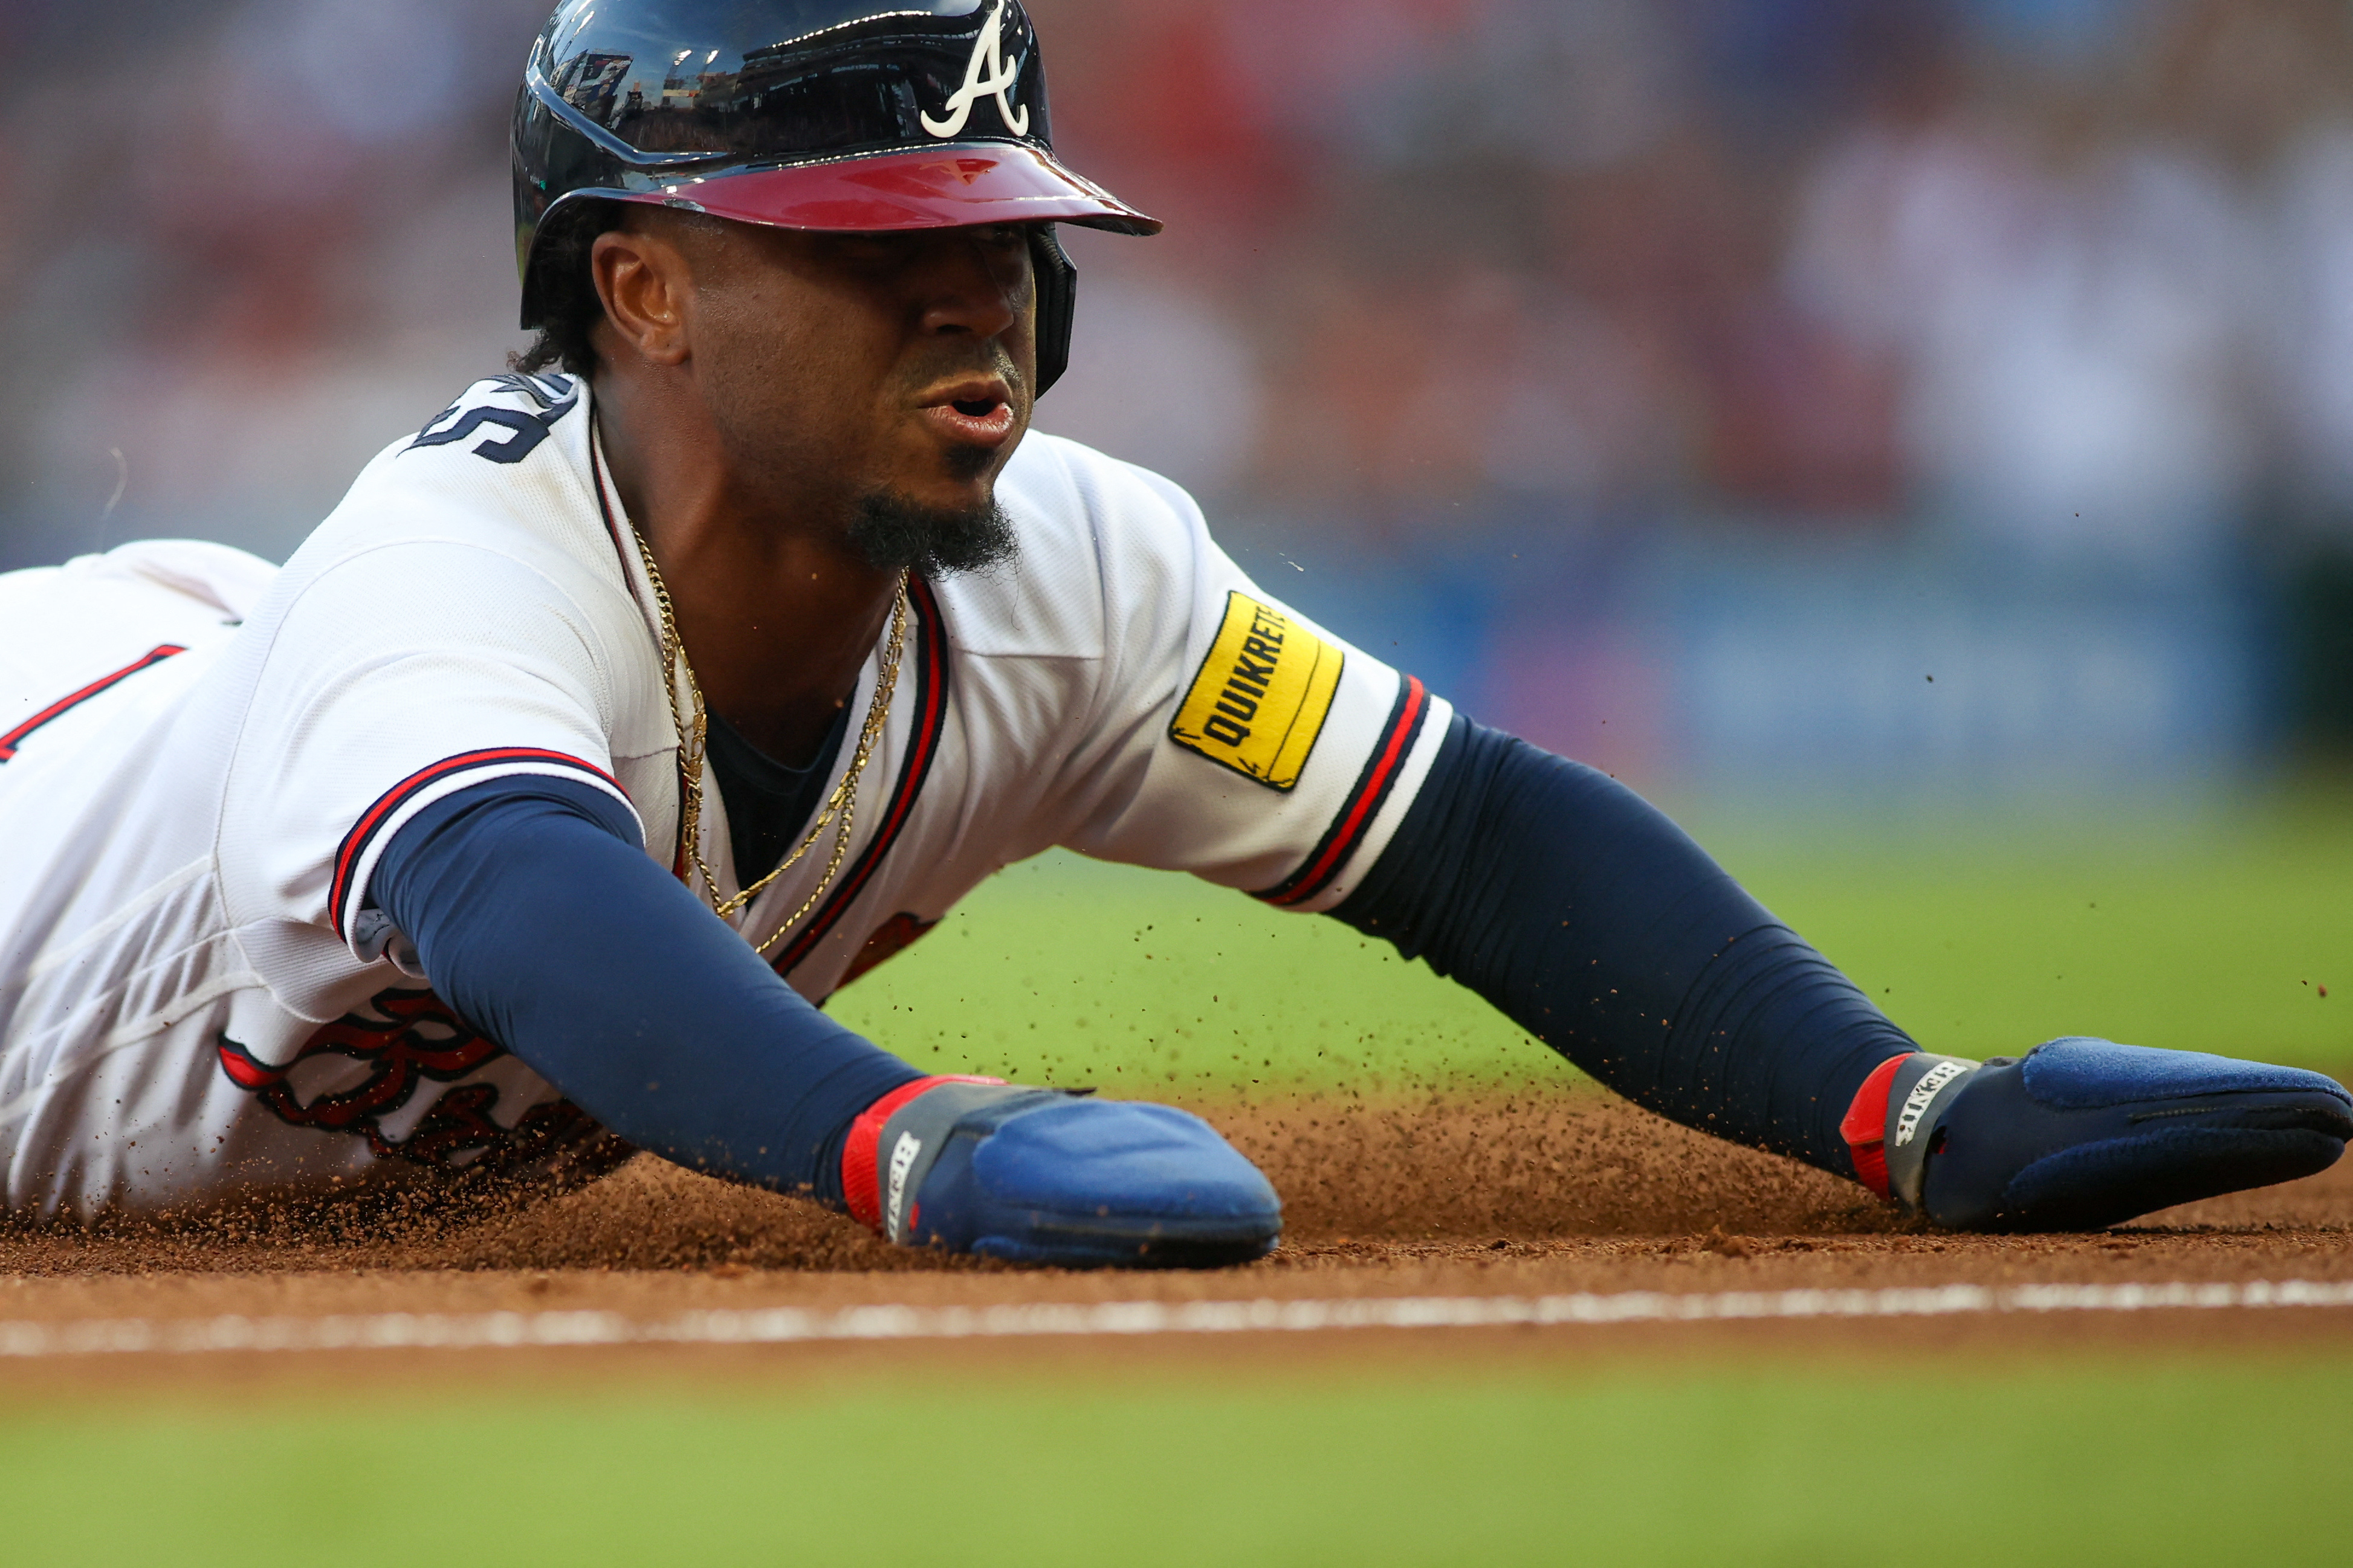 Harris ends power drought with 2 homers as Strider, Braves beat Angels 5-1  - The San Diego Union-Tribune